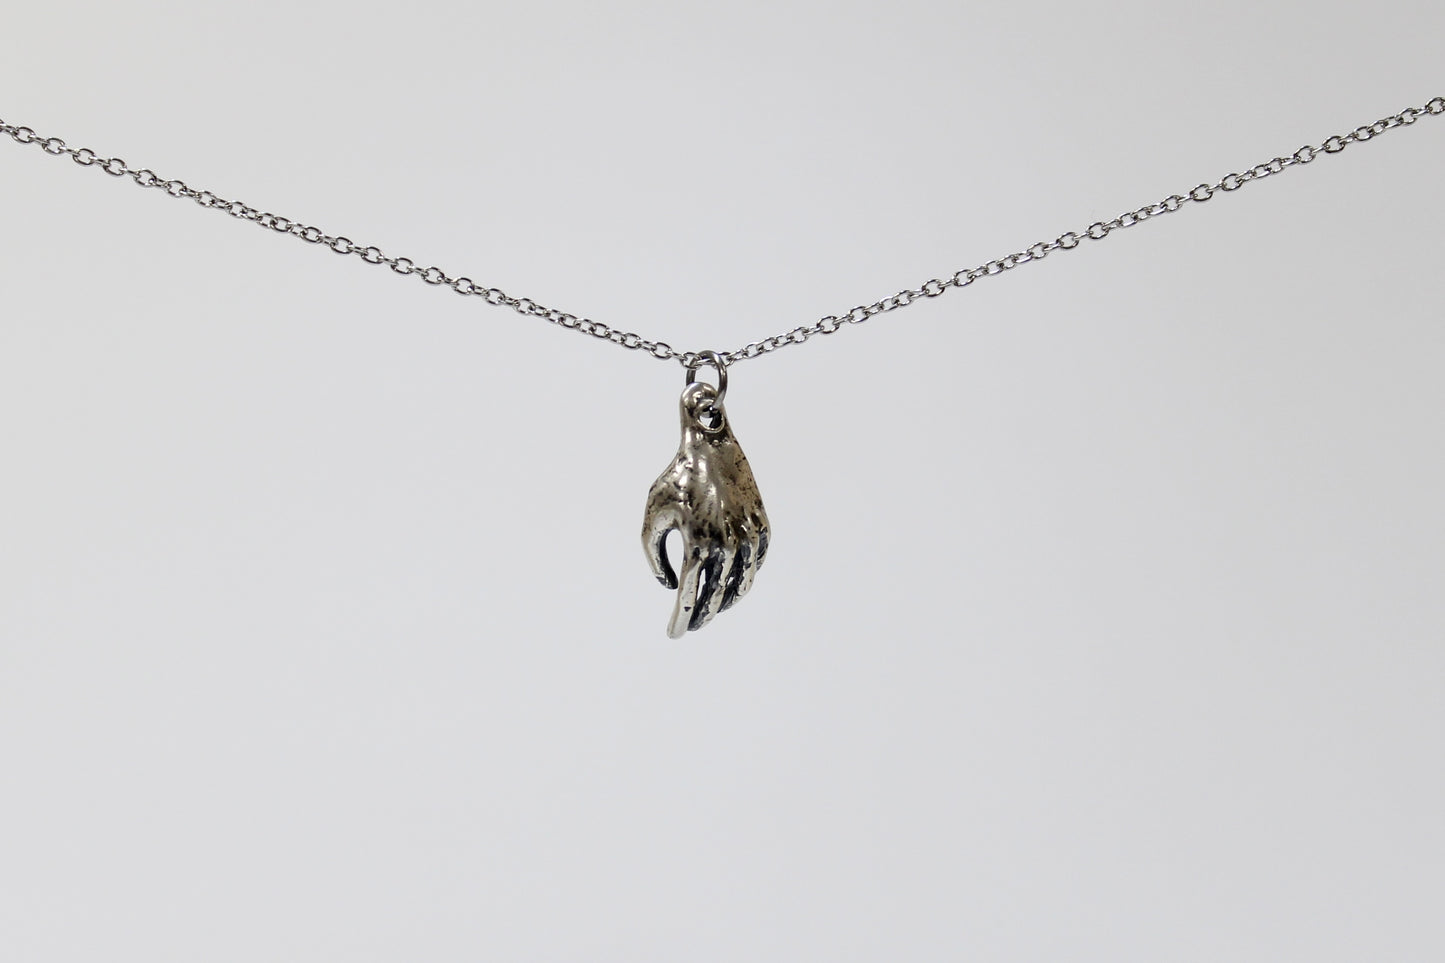 Hand Pendant Necklace. Sterling silver. 1" x 2.5". Select chain length 16, 18, 20 inch